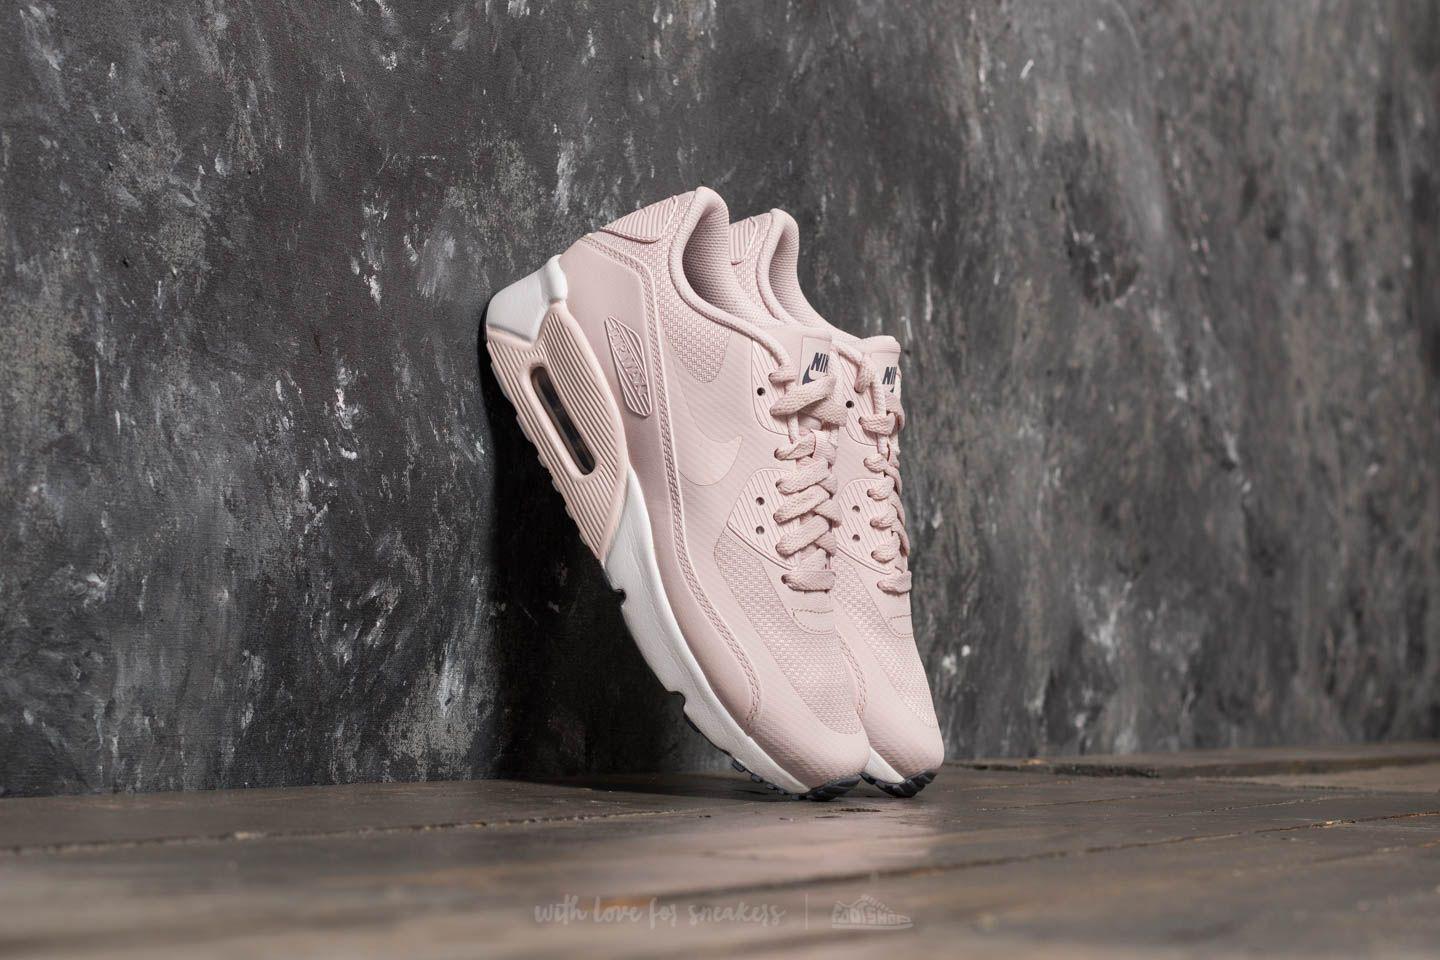 Nike Rubber Air Max 90 Ultra 2.0 (gs) Barely Rose/ Barely Rose in 